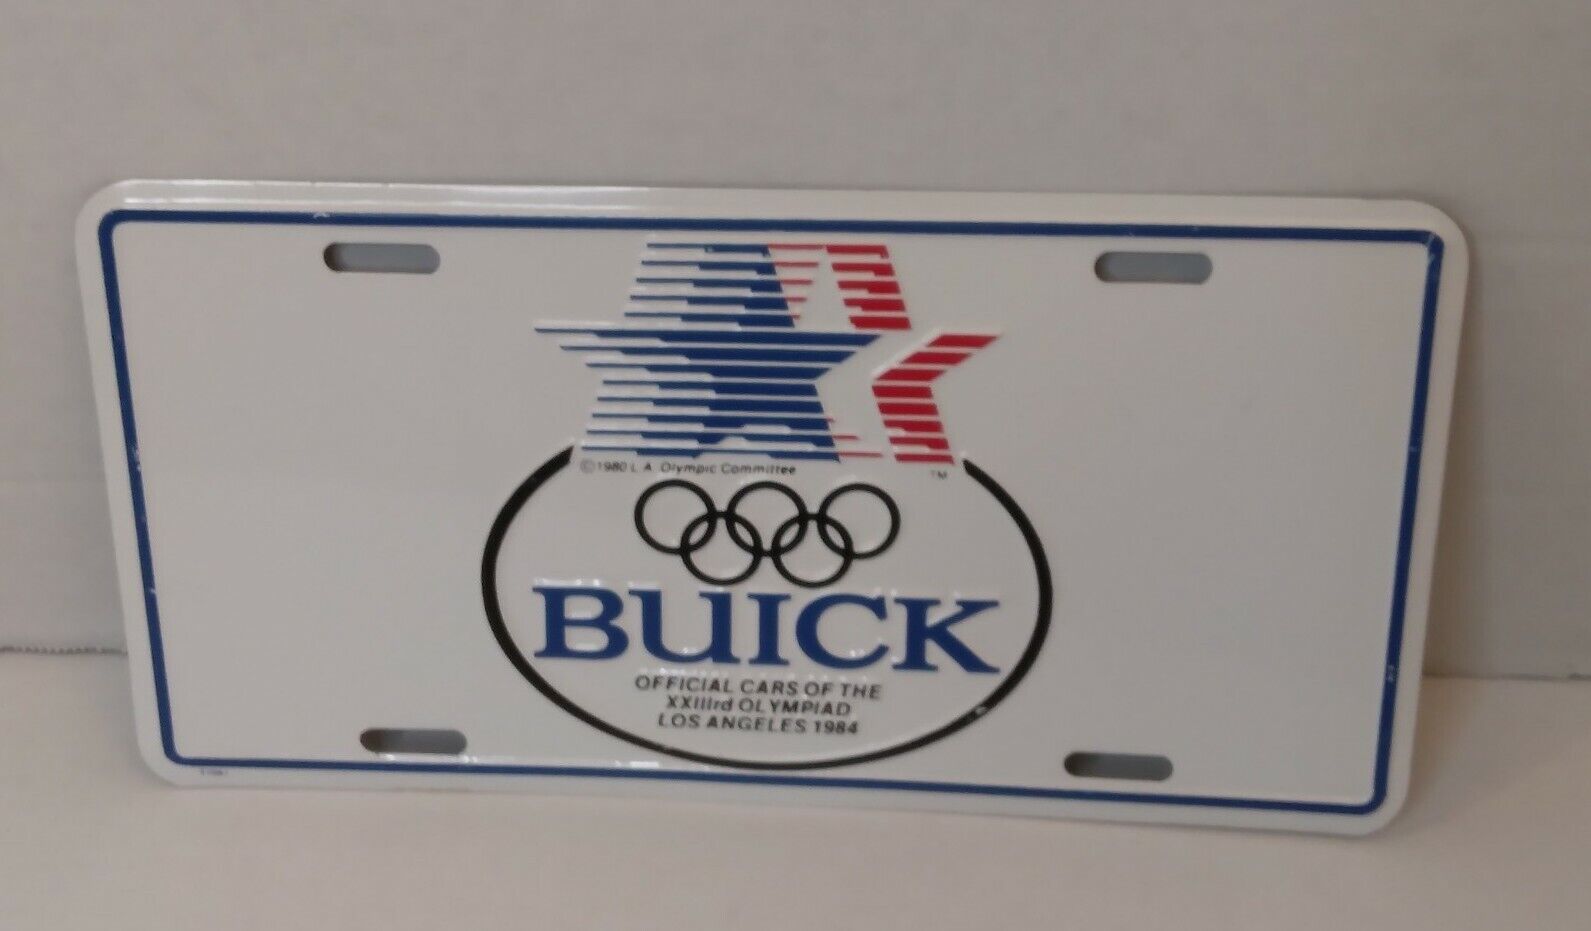 Vintage 1984 Buick Los Angeles Olympic License Plate